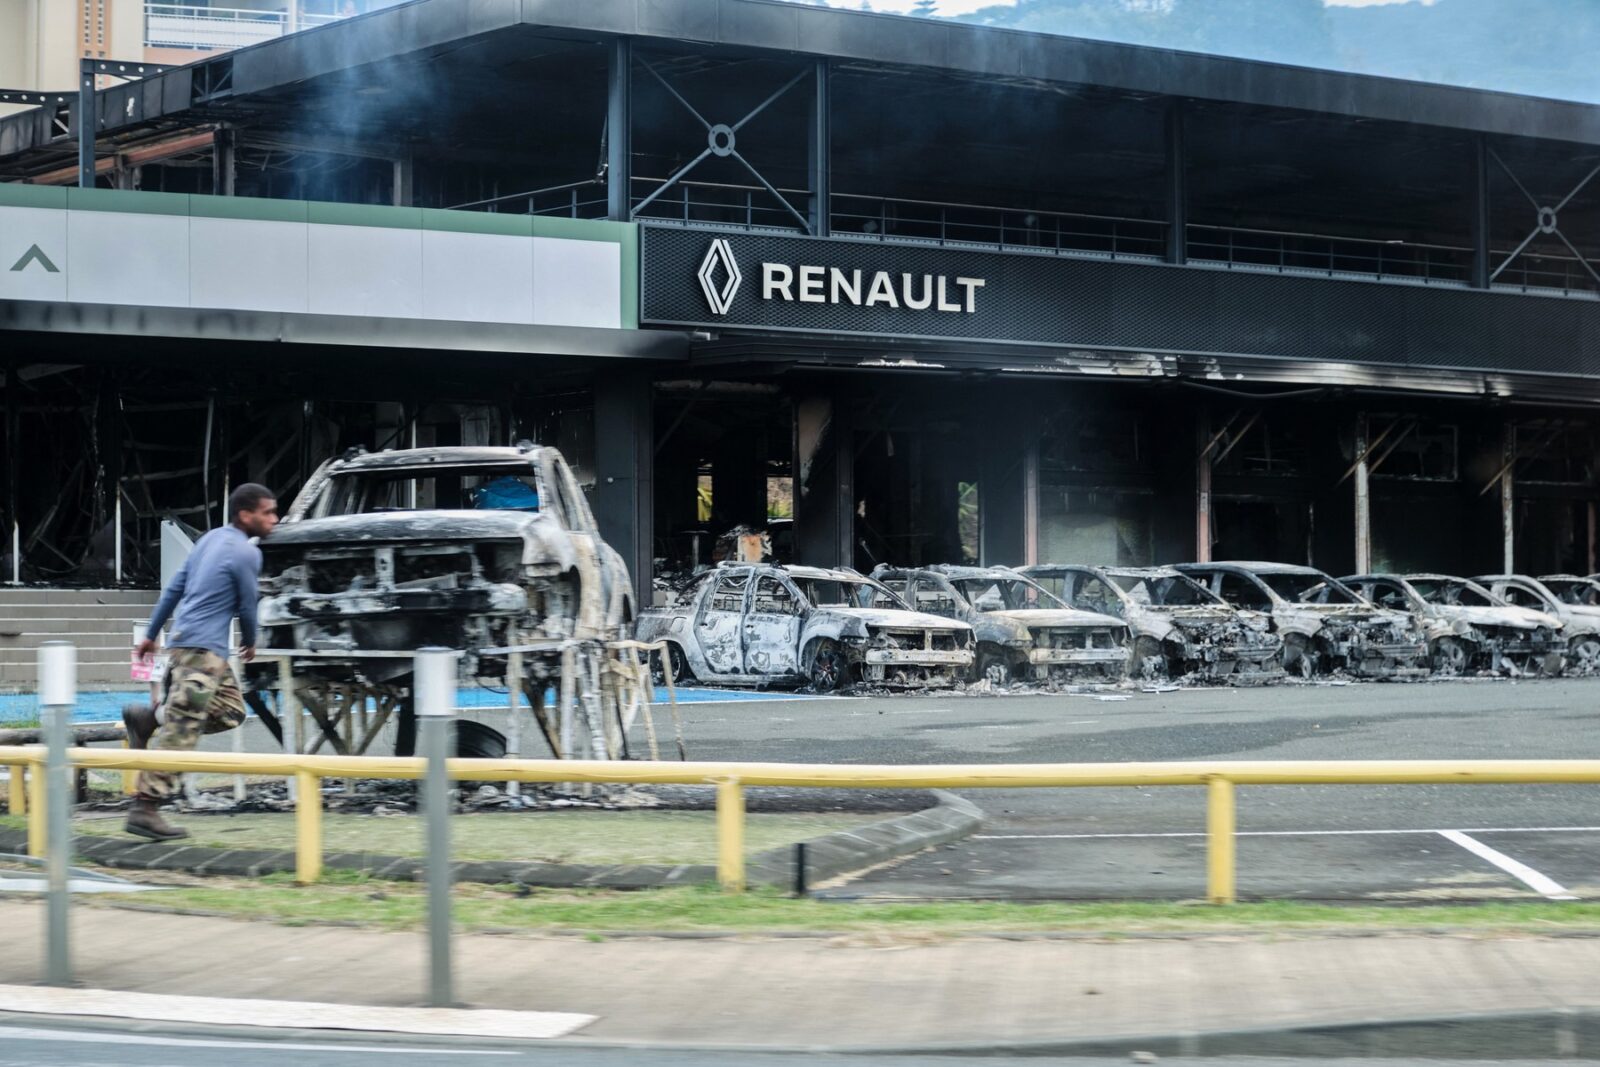 This photograph shows a view of burnt cars and a burnt Renault car shop amid protests linked to a debate on a constitutional bill aimed at enlarging the electorate for upcoming elections in the overseas French territory of New Caledonia, in Noumea, on May 14, 2024. After scenes of violence of "great intensity" including burned vehicles, looted stores and clashes between demonstrators and the police, a curfew was decreed in Noumea, 17,000 kilometers from Paris, as the independentists of the overseas French territory of New Caledonia oppose a constitutional revision they fear will "further minimize the indigenous Kanak people".,Image: 872696346, License: Rights-managed, Restrictions: , Model Release: no, Credit line: Theo ROUBY / AFP / Profimedia